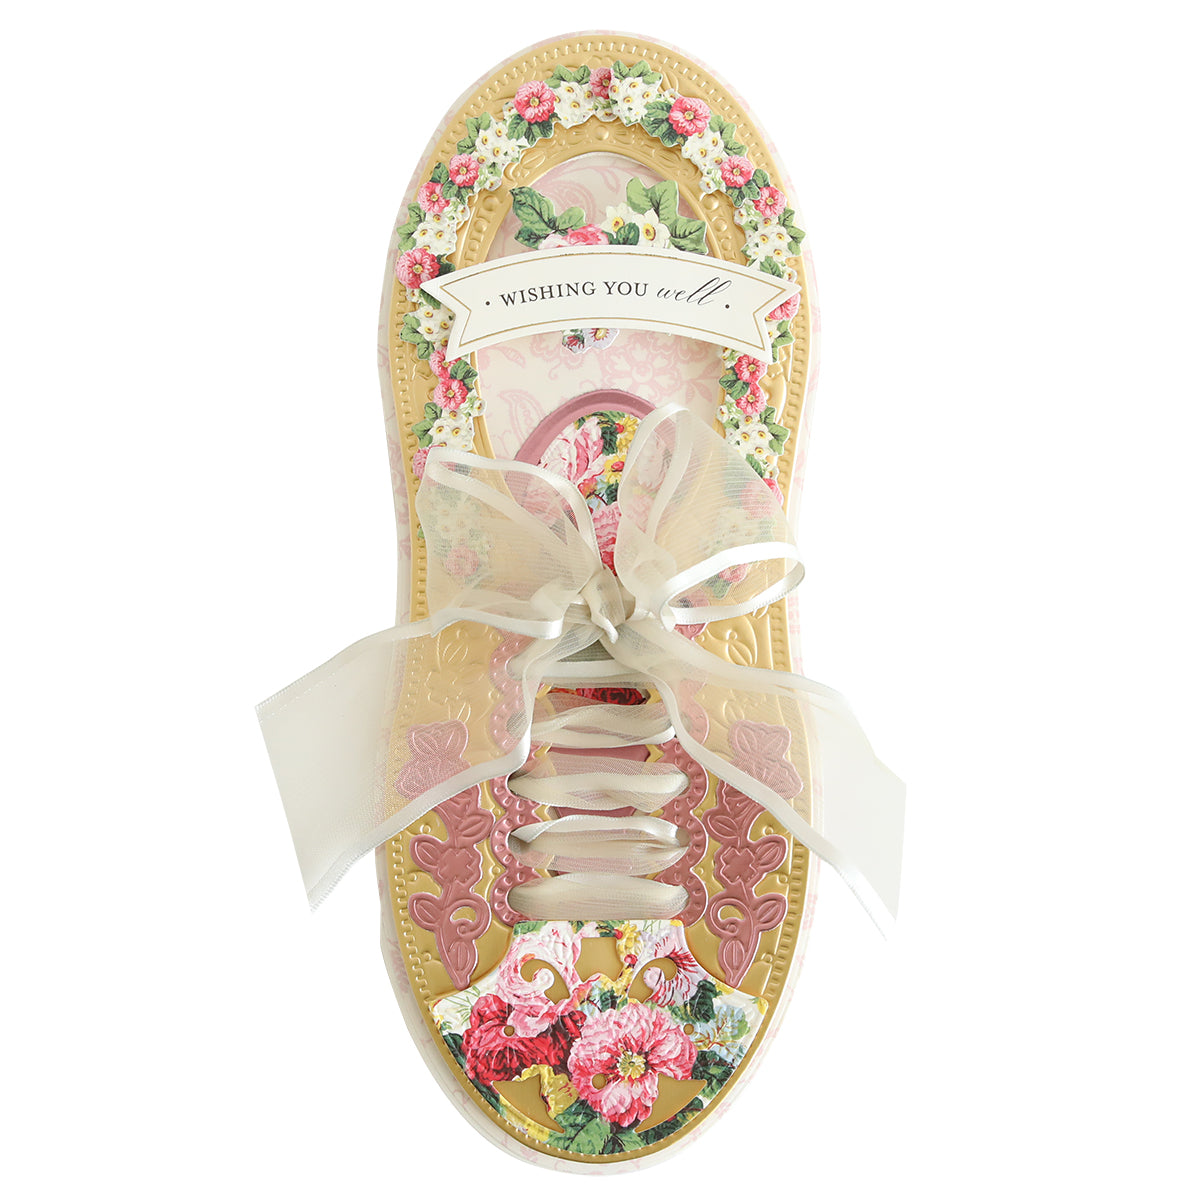 Decorative floral paper shoe with a bow and "wishing you well" message from 2024 Finishing School Craft Box Autoship.